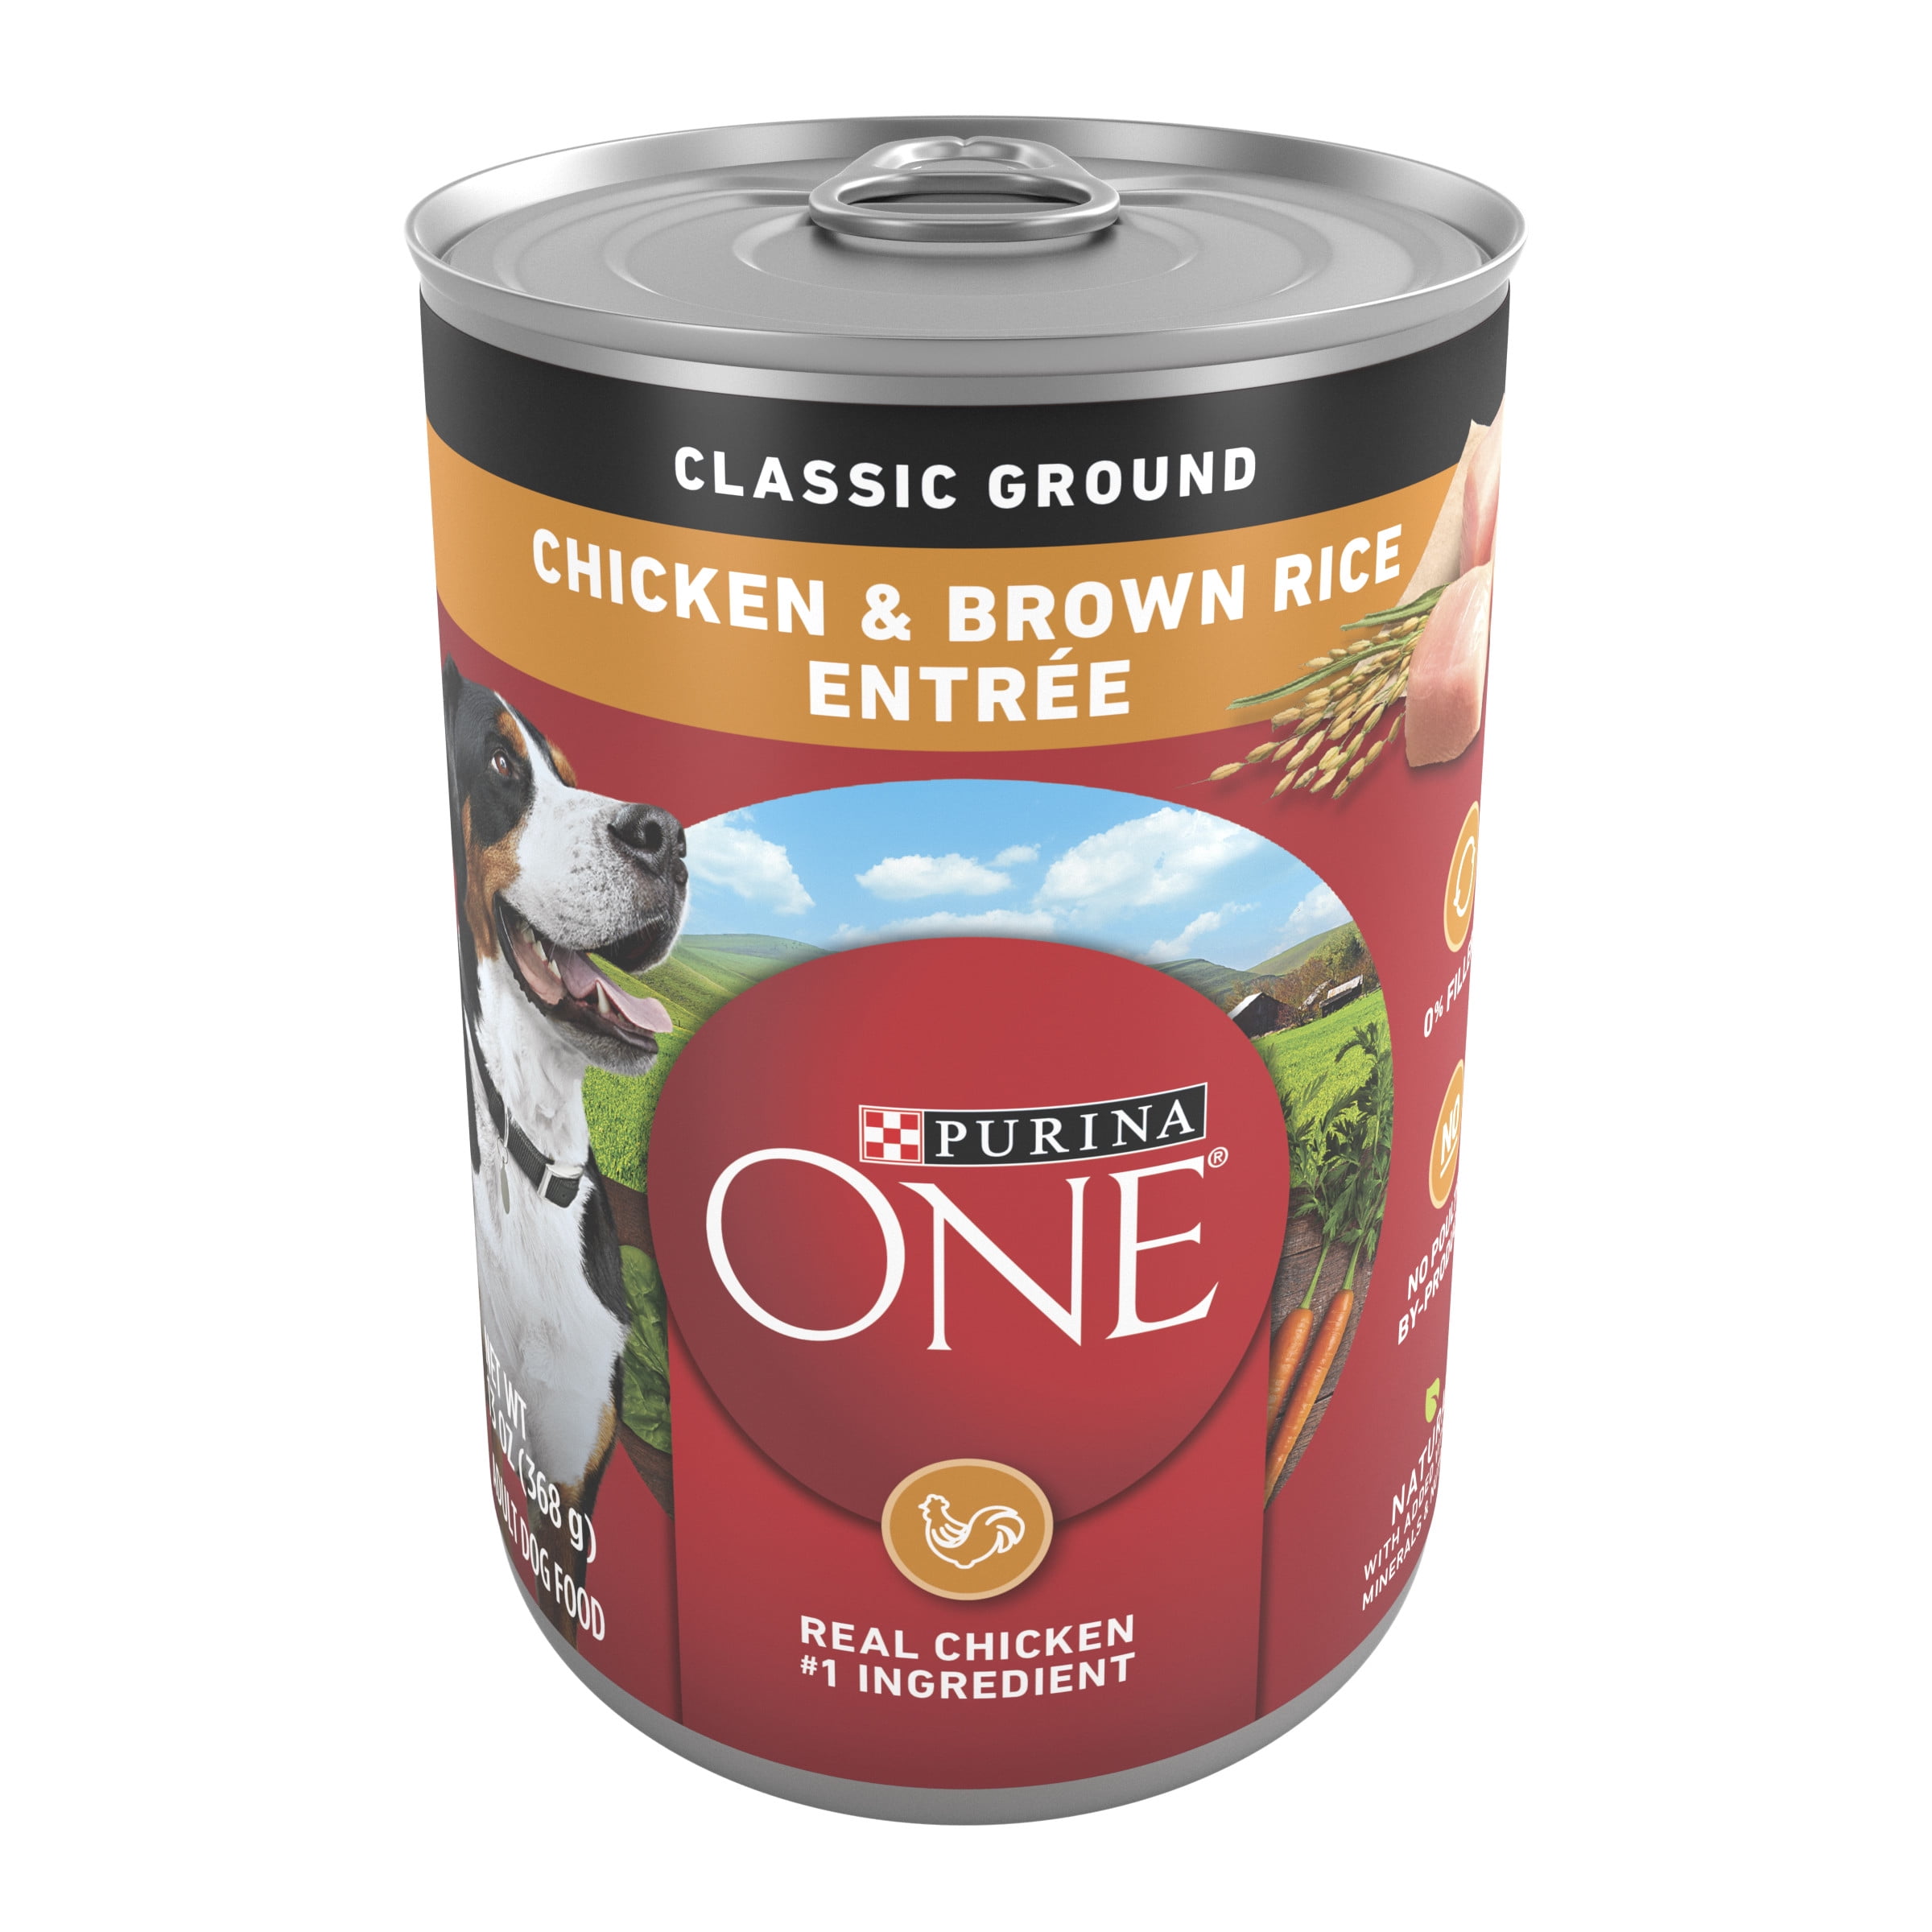 Purina ONE High Protein Chicken & Brown Rice Classic Ground Wet Dog Food, 13 oz Can